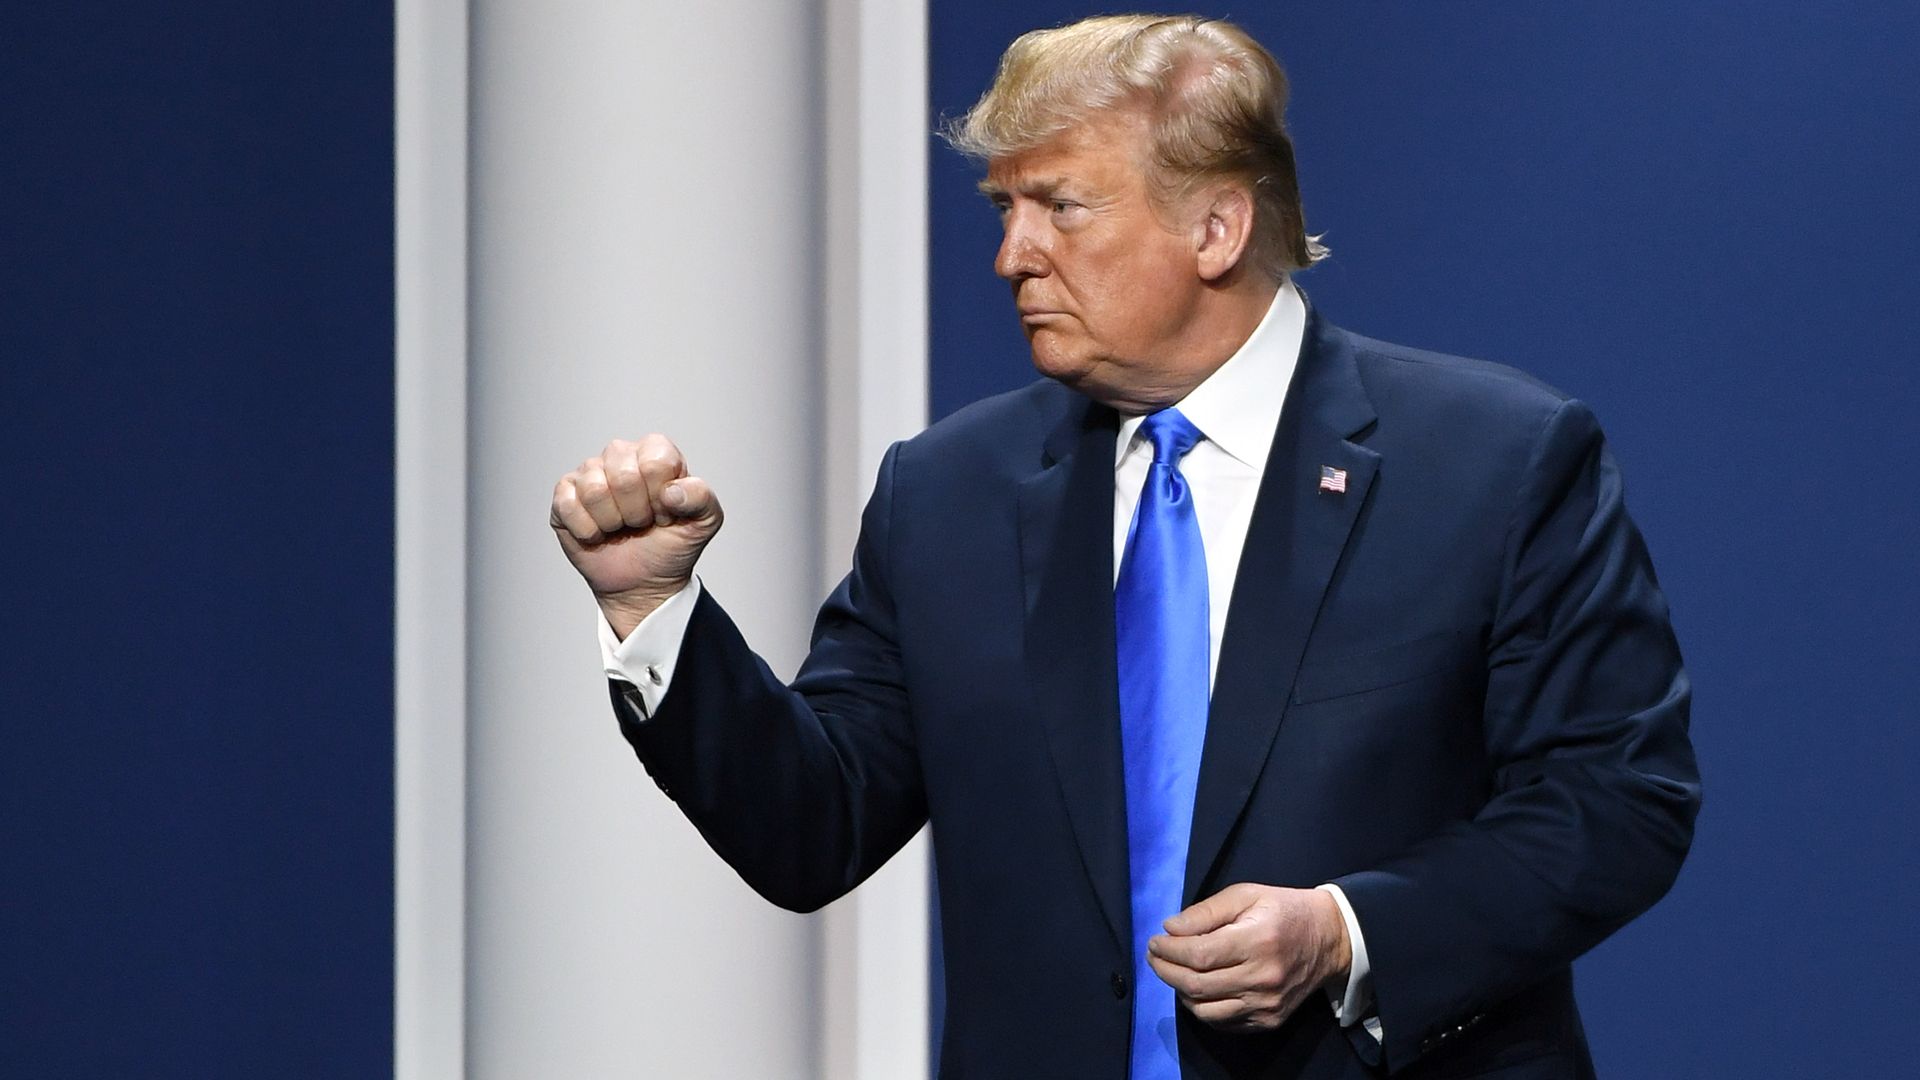 This is an image of Trump making a celebratory fist 